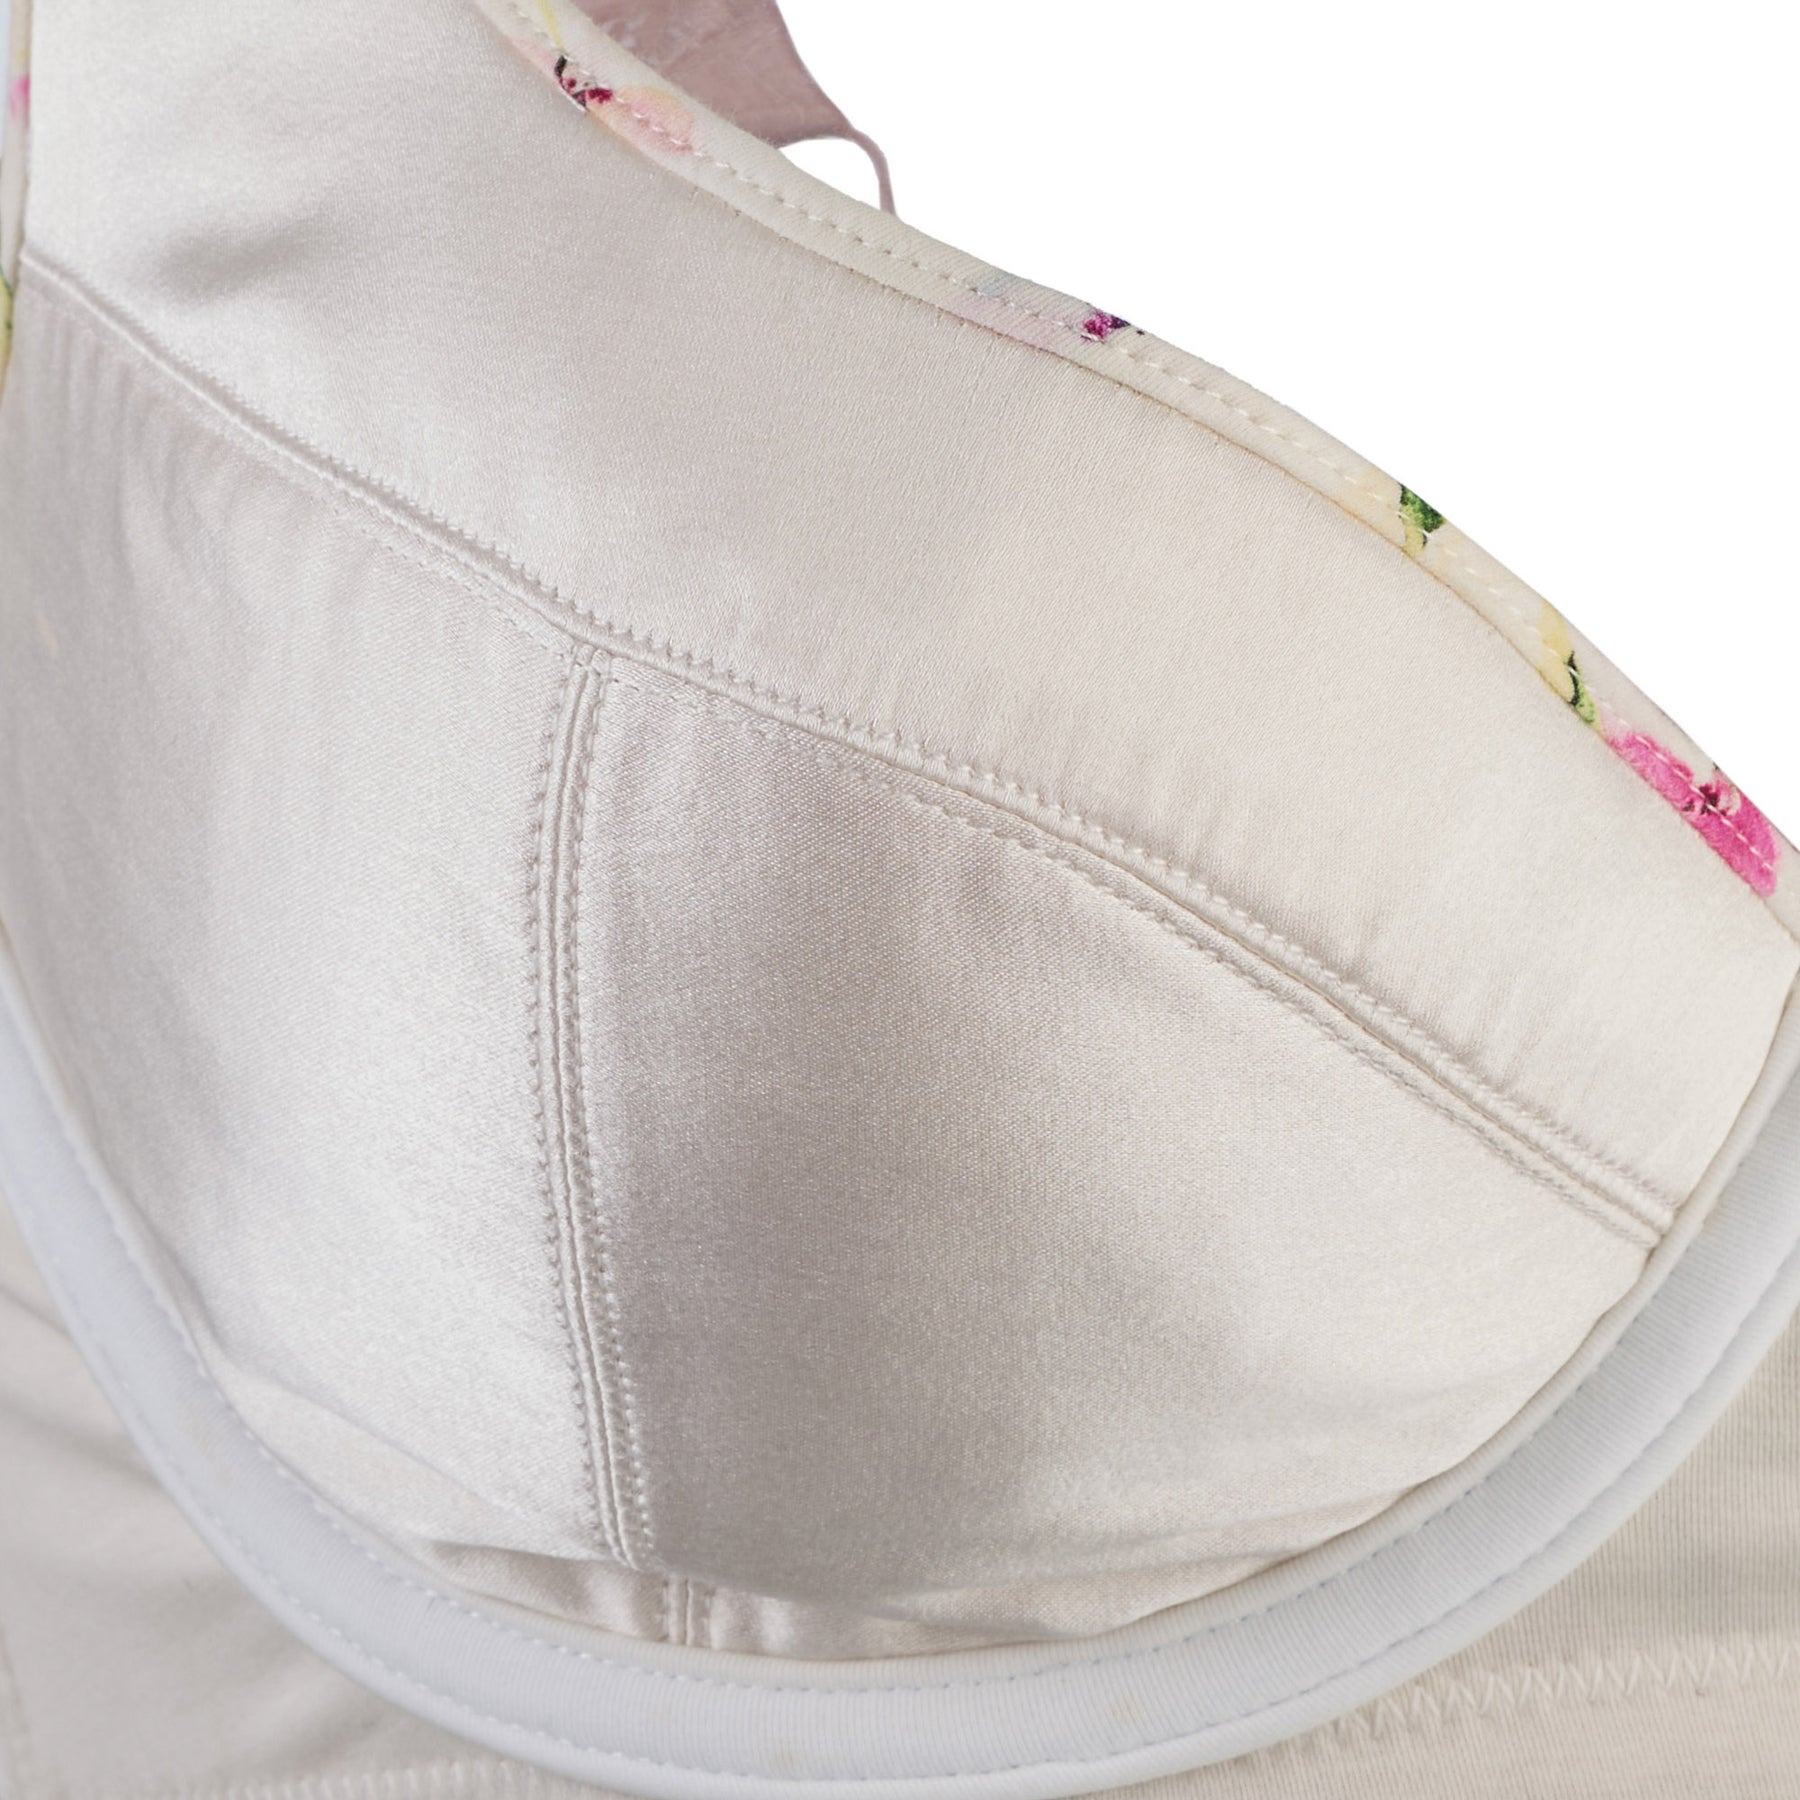 inside view of bra cup that's free from harmful dyes, chemicals, or bleach